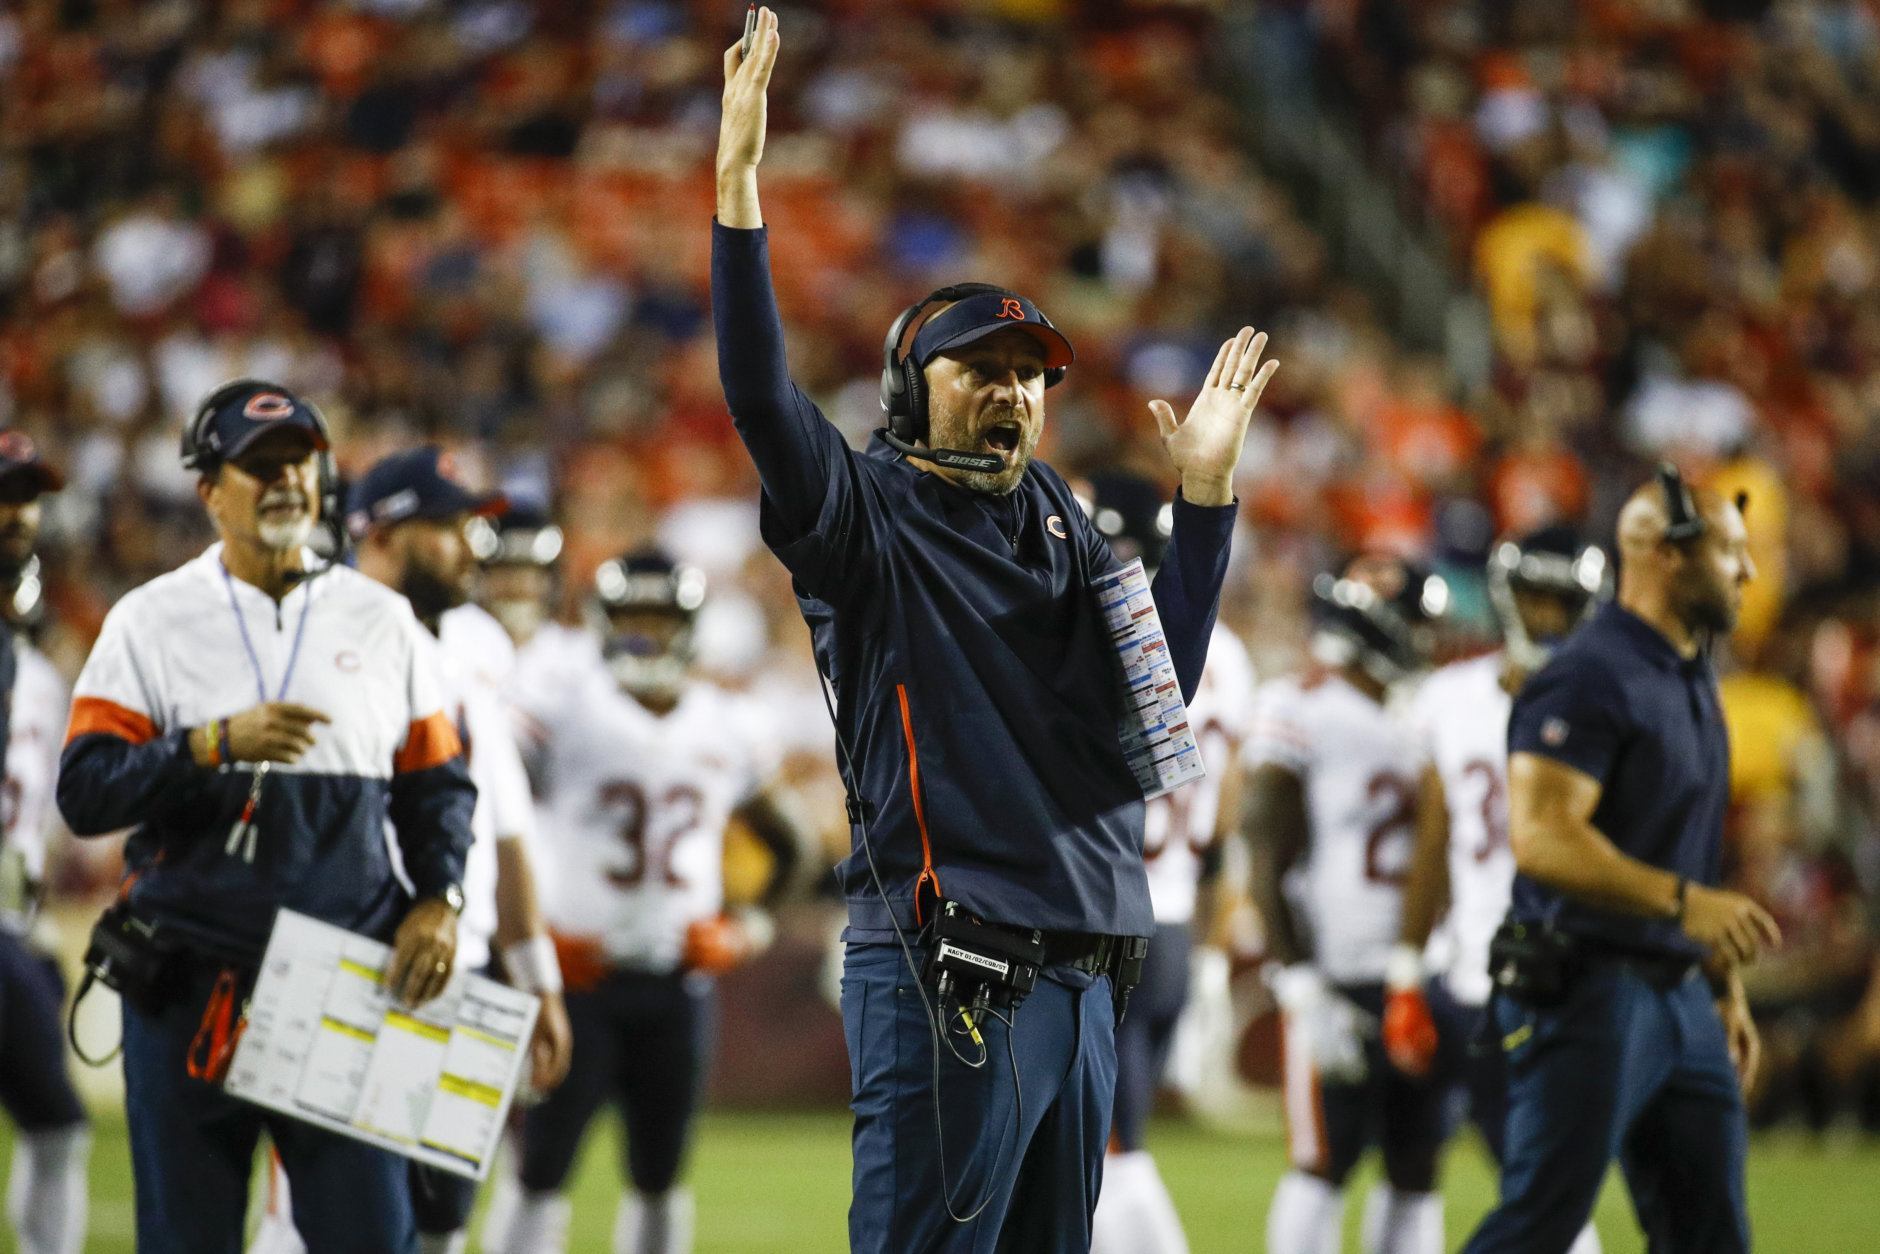 Chicago Bears head coach Matt Nagy, center, celebrates a touchdown by wide receiver Taylor Gabriel (18) after an official's review during the first half of an NFL football game against the Washington Redskins, Monday, Sept. 23, 2019, in Landover, Md. (AP Photo/Patrick Semansky)